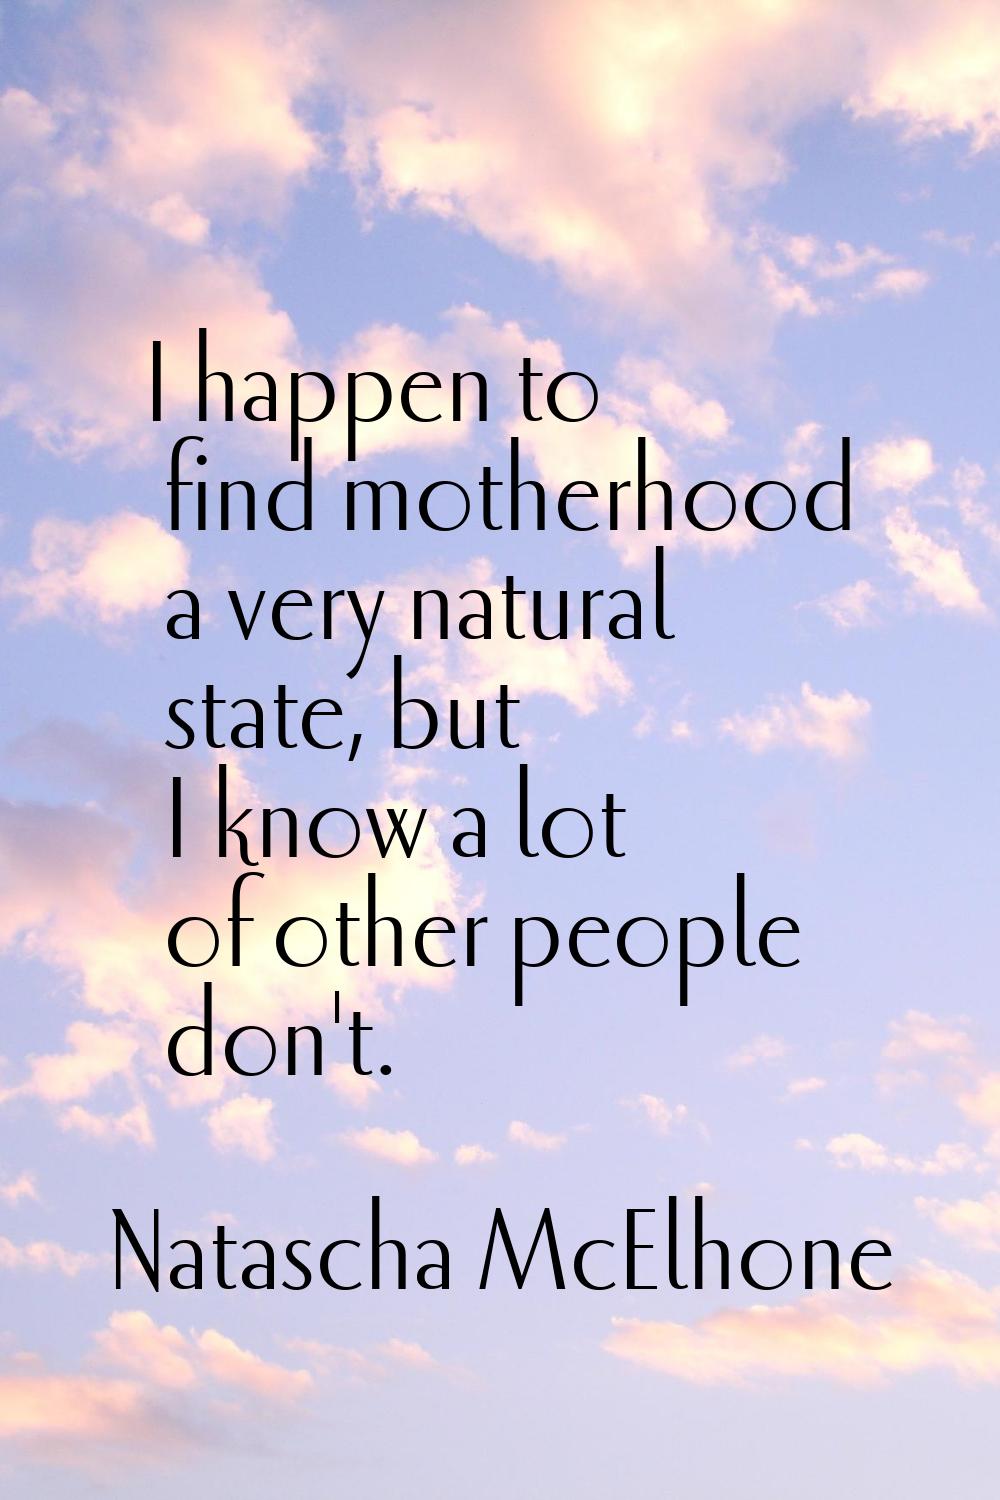 I happen to find motherhood a very natural state, but I know a lot of other people don't.